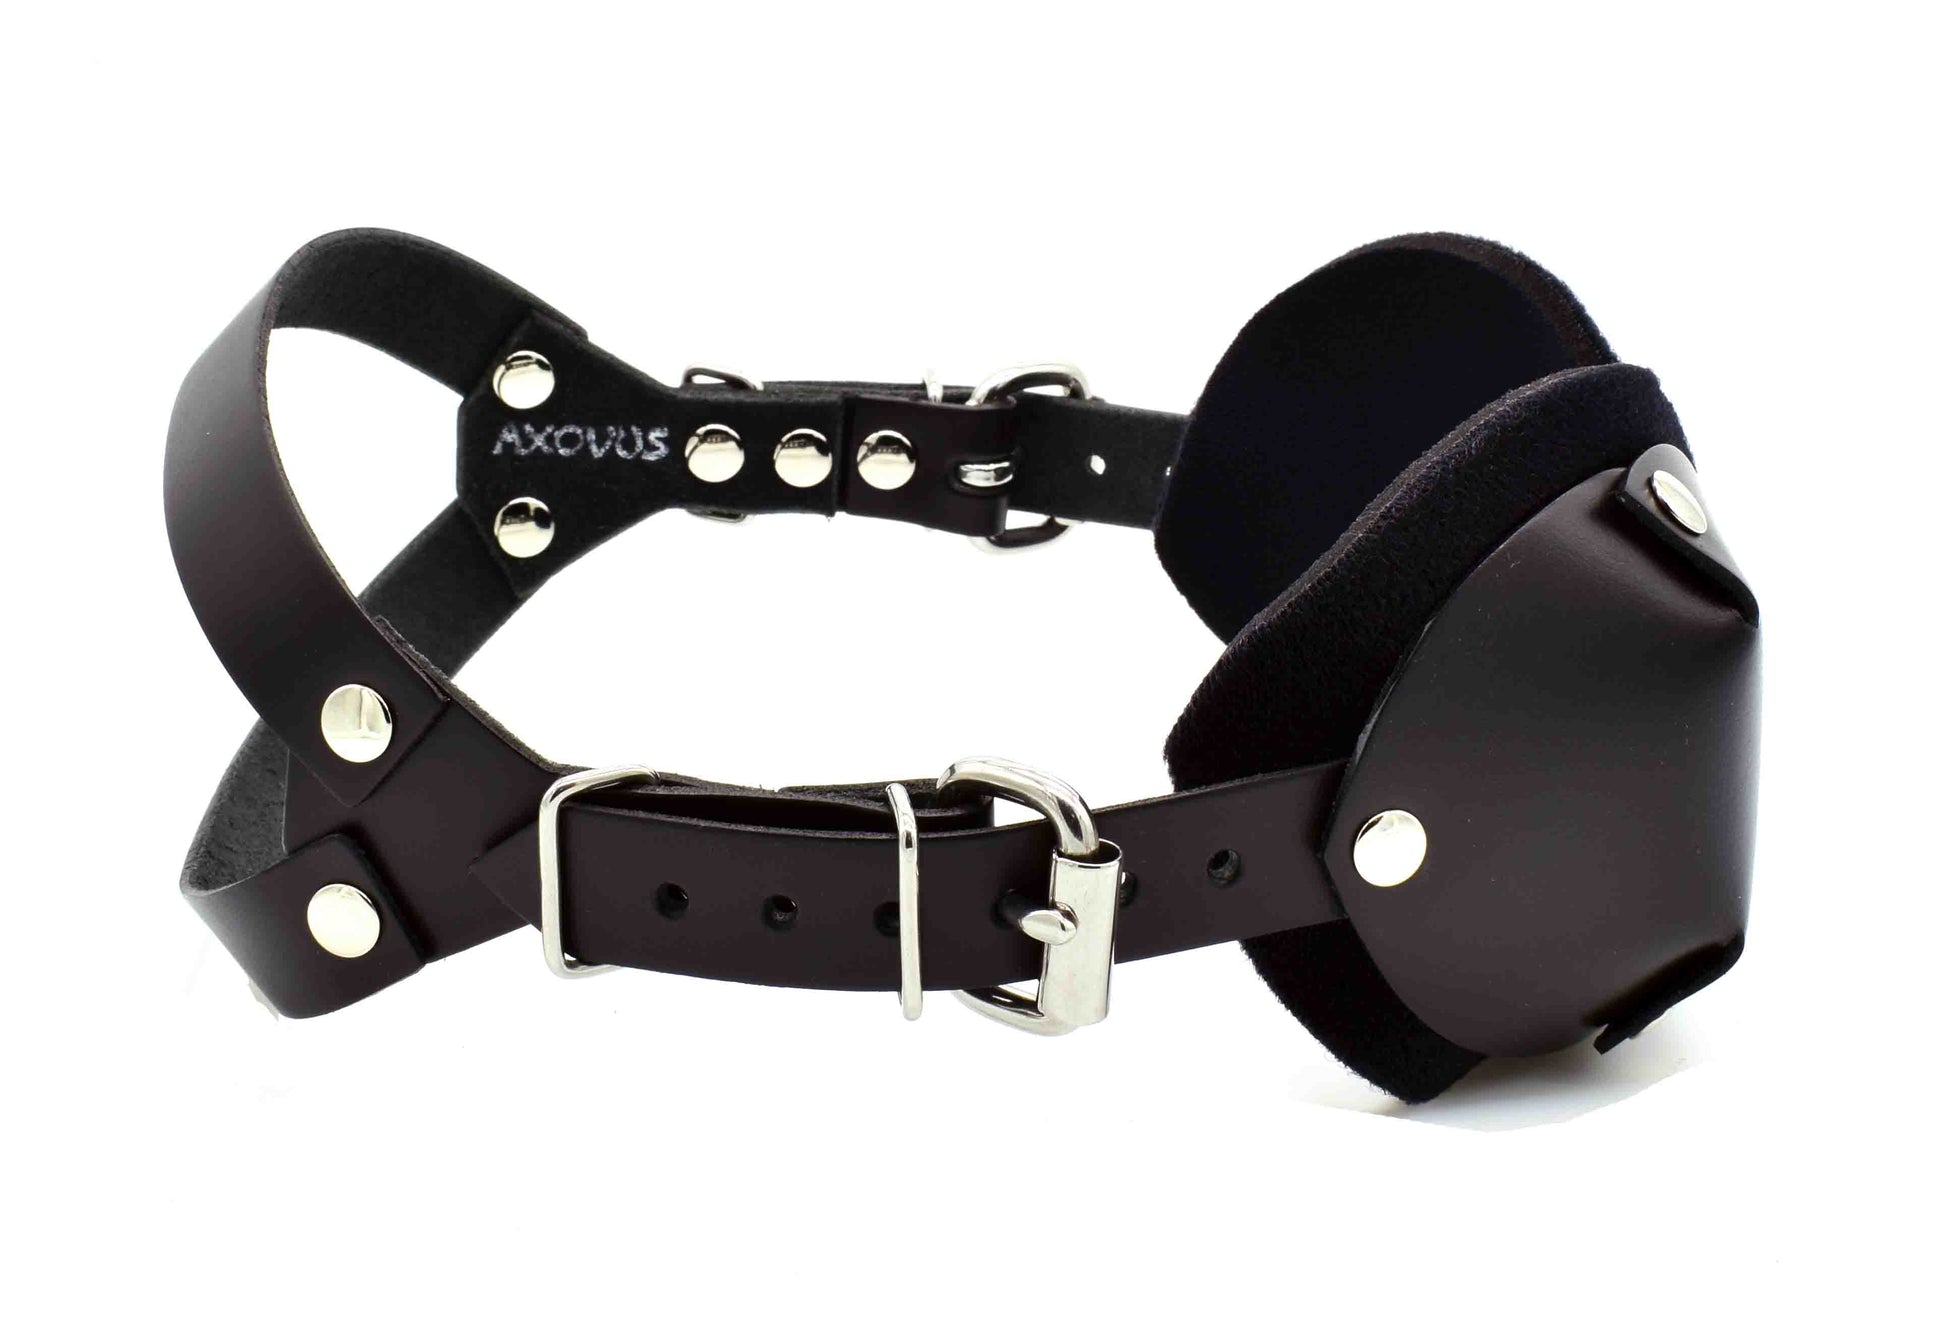 The leather Ultimate Blindfold, right side view.